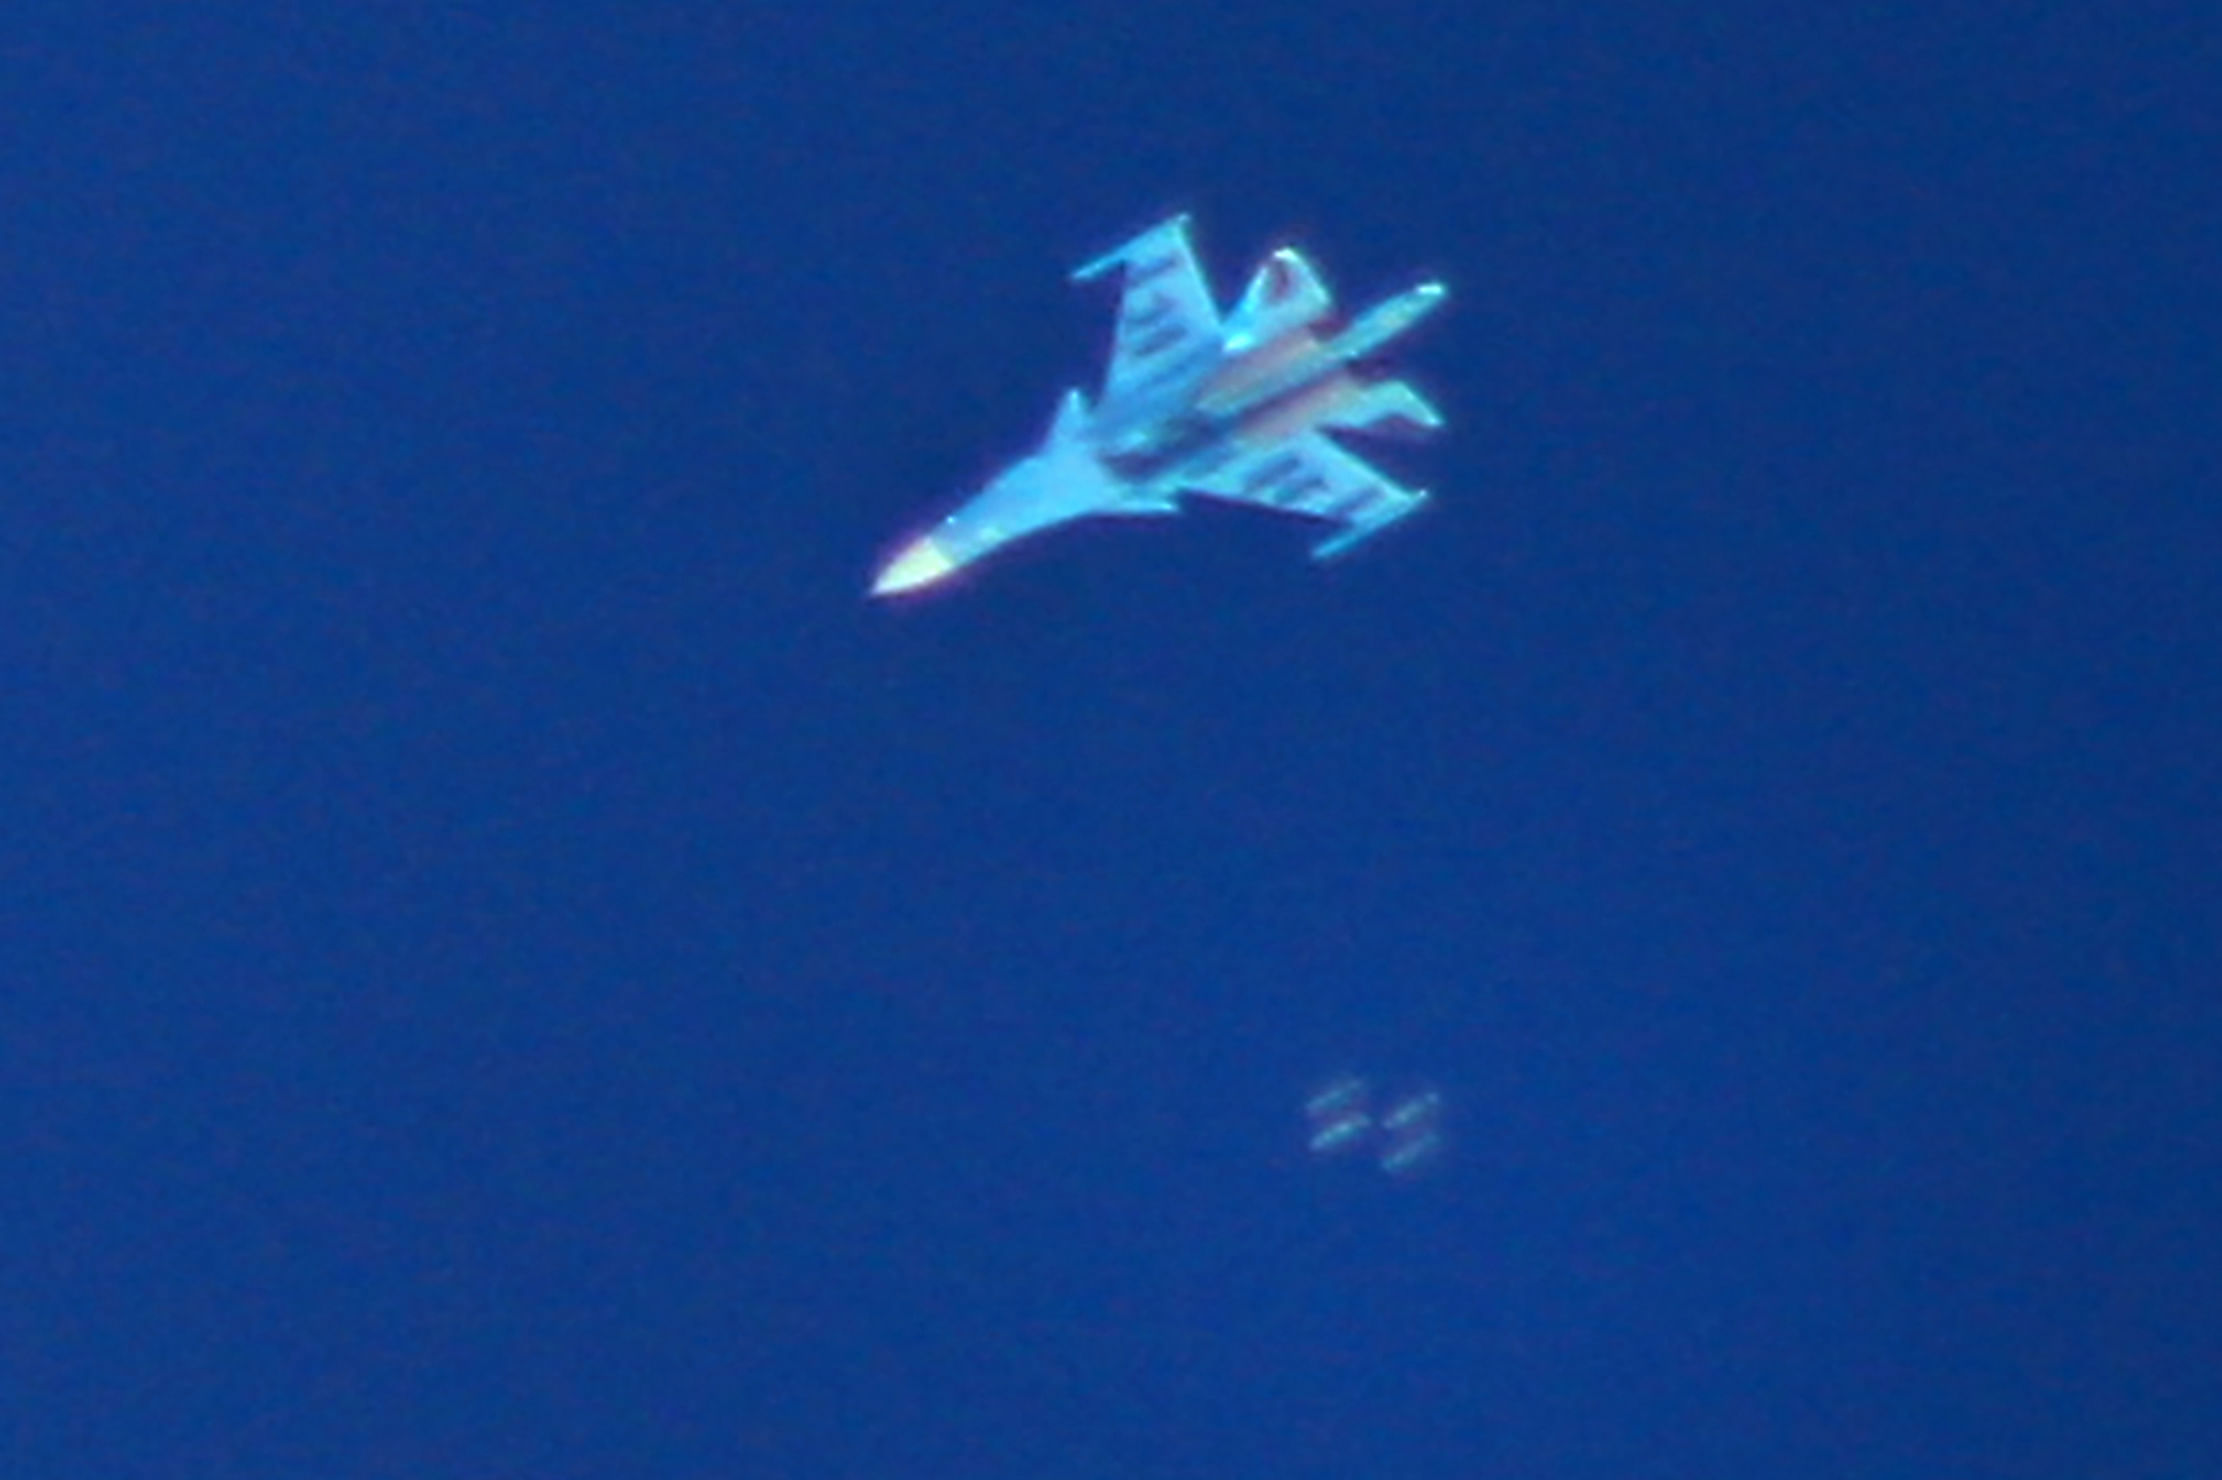 In this file photo taken on September 7, 2018, Russian Sukhoi Su-34 fighter drops bombs over the Syrian village of Kafr Ain in the southern countryside of Idlib province. - Air strikes by Syrian regime ally Russia killed 56 fighters from a Turkey-backed rebel group in northwest Syria on October 26, 2020, a Britain-based war monitor said. Russian warplanes also wounded 100 people when they targeted a training camp of the Faylaq al-Sham faction in the Jabal Duwayli area in Idlib province, the Syrian Observatory for Human Rights said. Credit: AFP